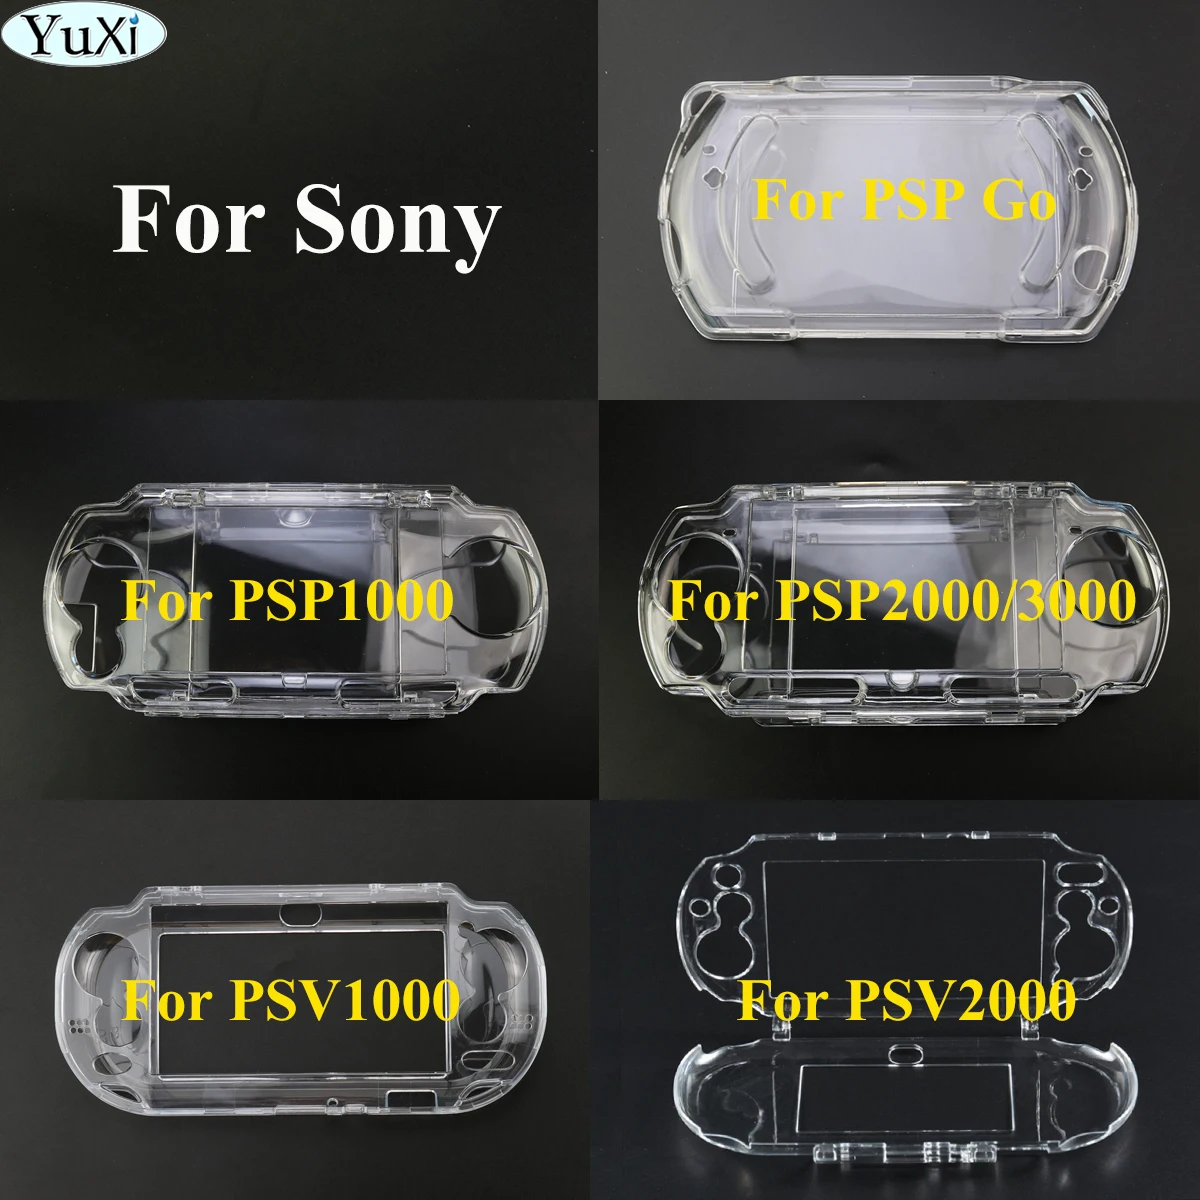 

Crystal Transparent Hard Protective Case Cover Shell for Sony Ps Vita Psv PSP go 1000 2000 3000 Full Body Protector Skin Case